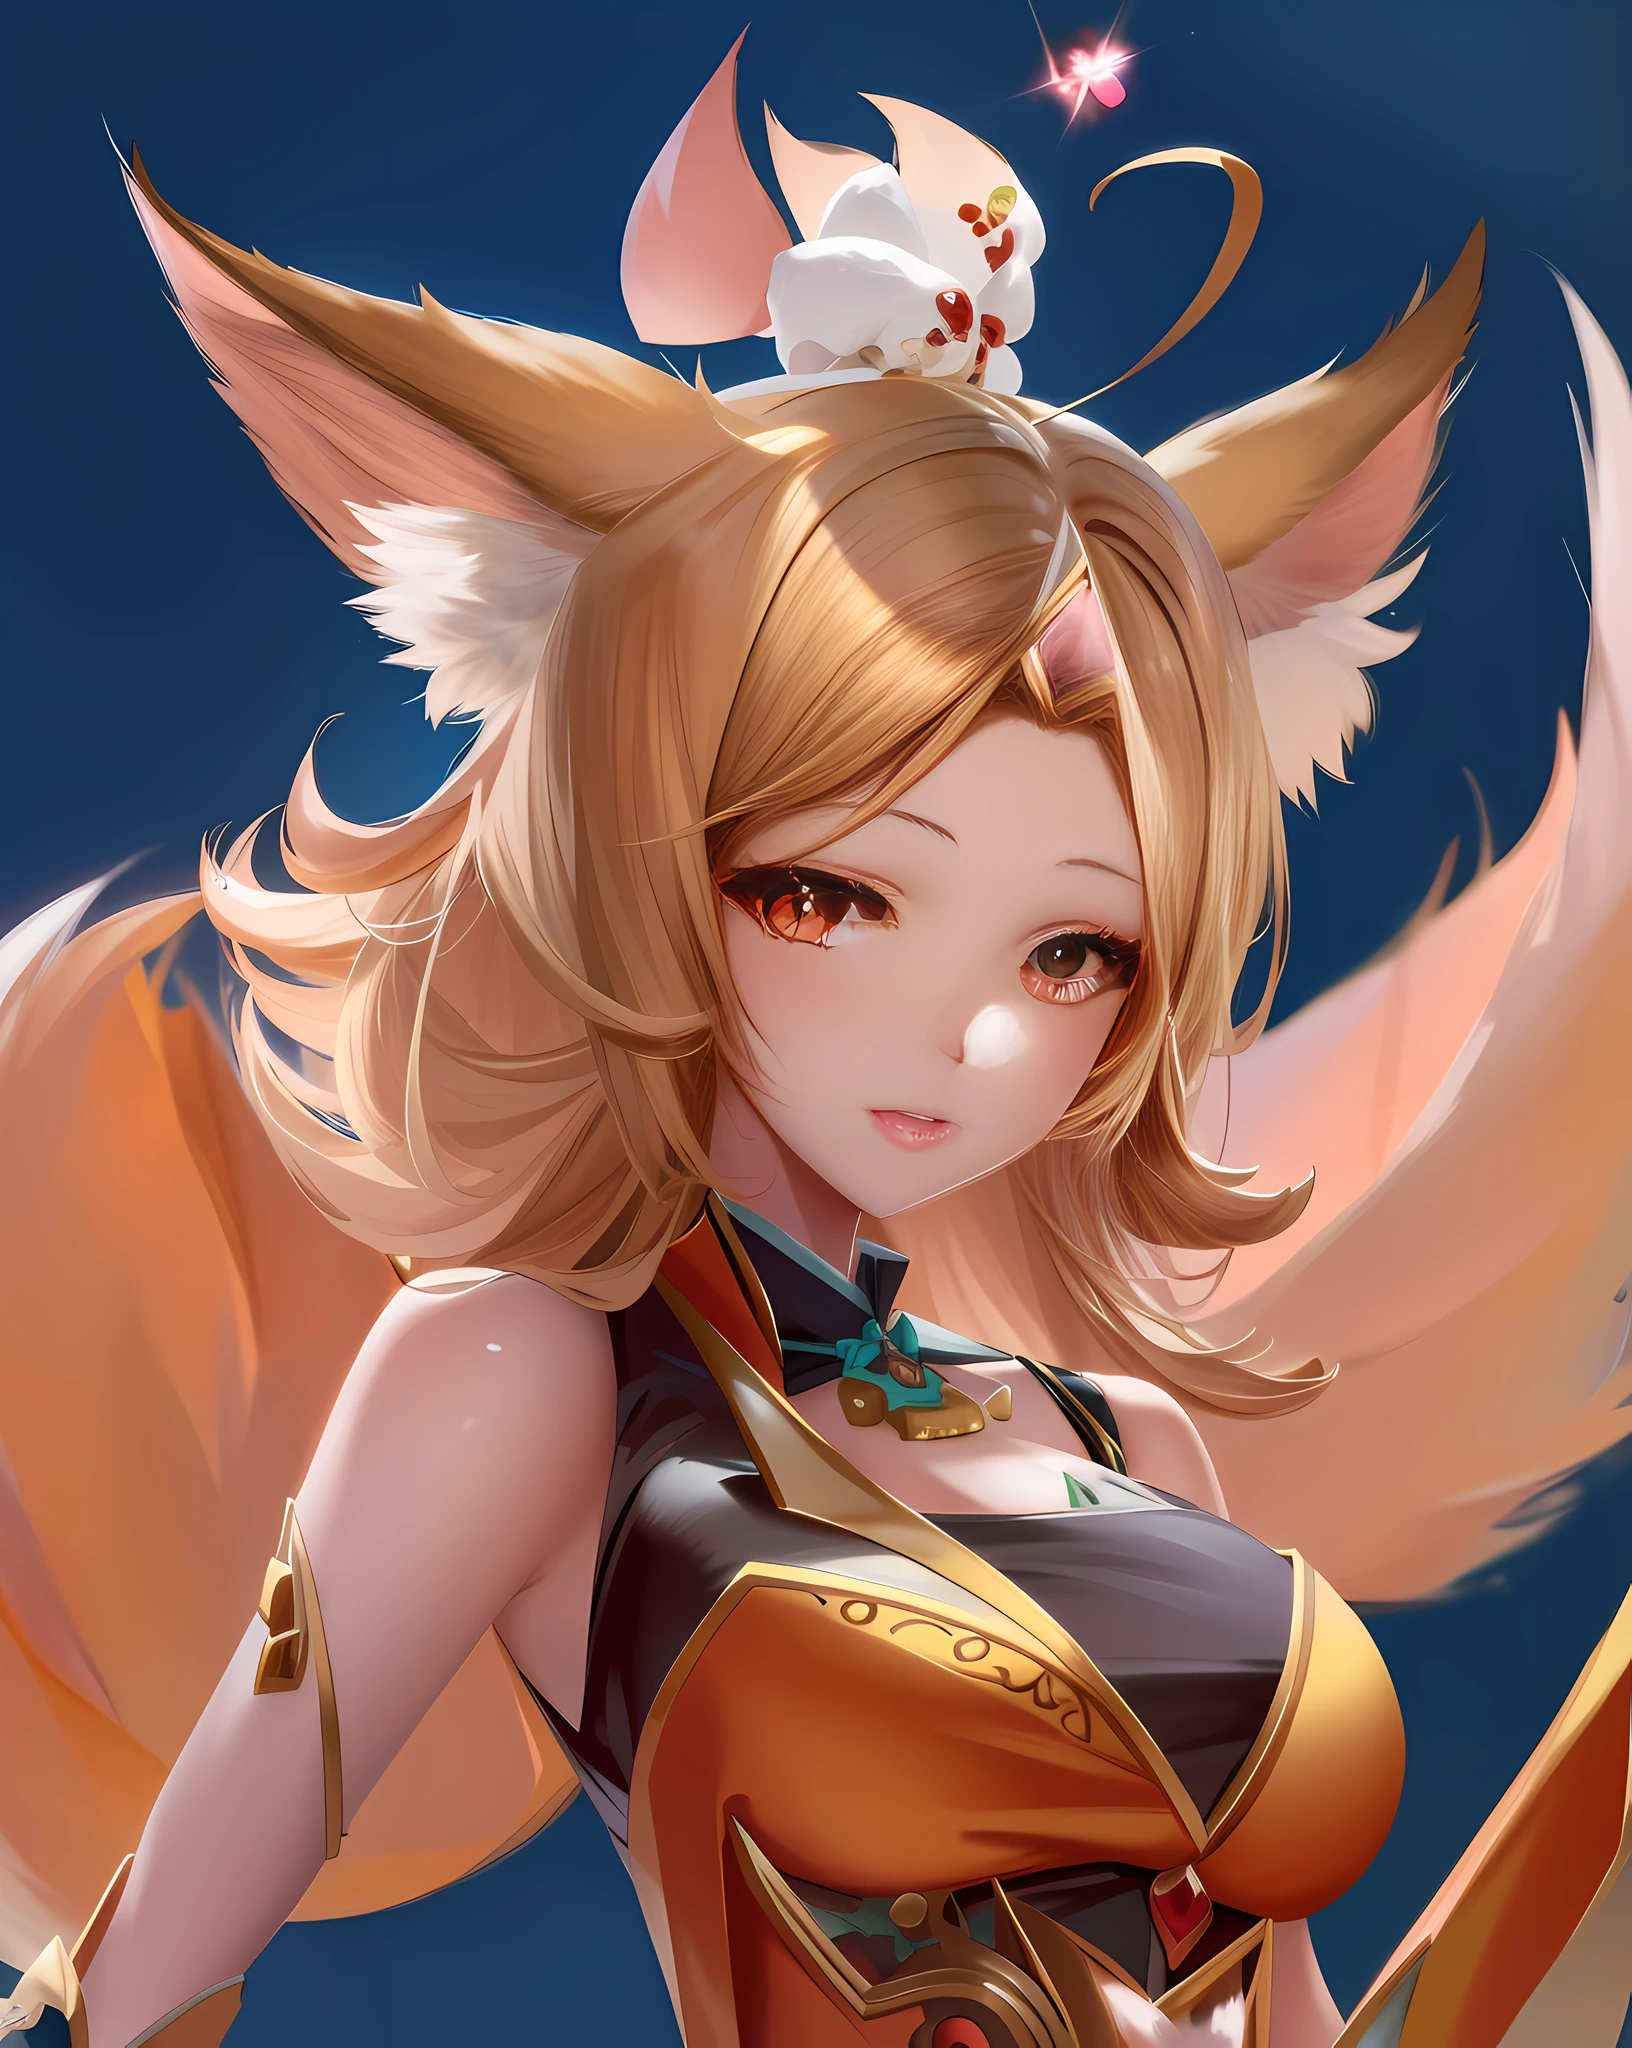 anime girl with cat ears and a cat on her head, ahri, portrait of ahri, extremely detailed artgerm, wlop and sakimichan, style artgerm, a beautiful fox lady, artgerm detailed, ig model | artgerm, artgerm style, artgerm. high detail, ! dream artgerm